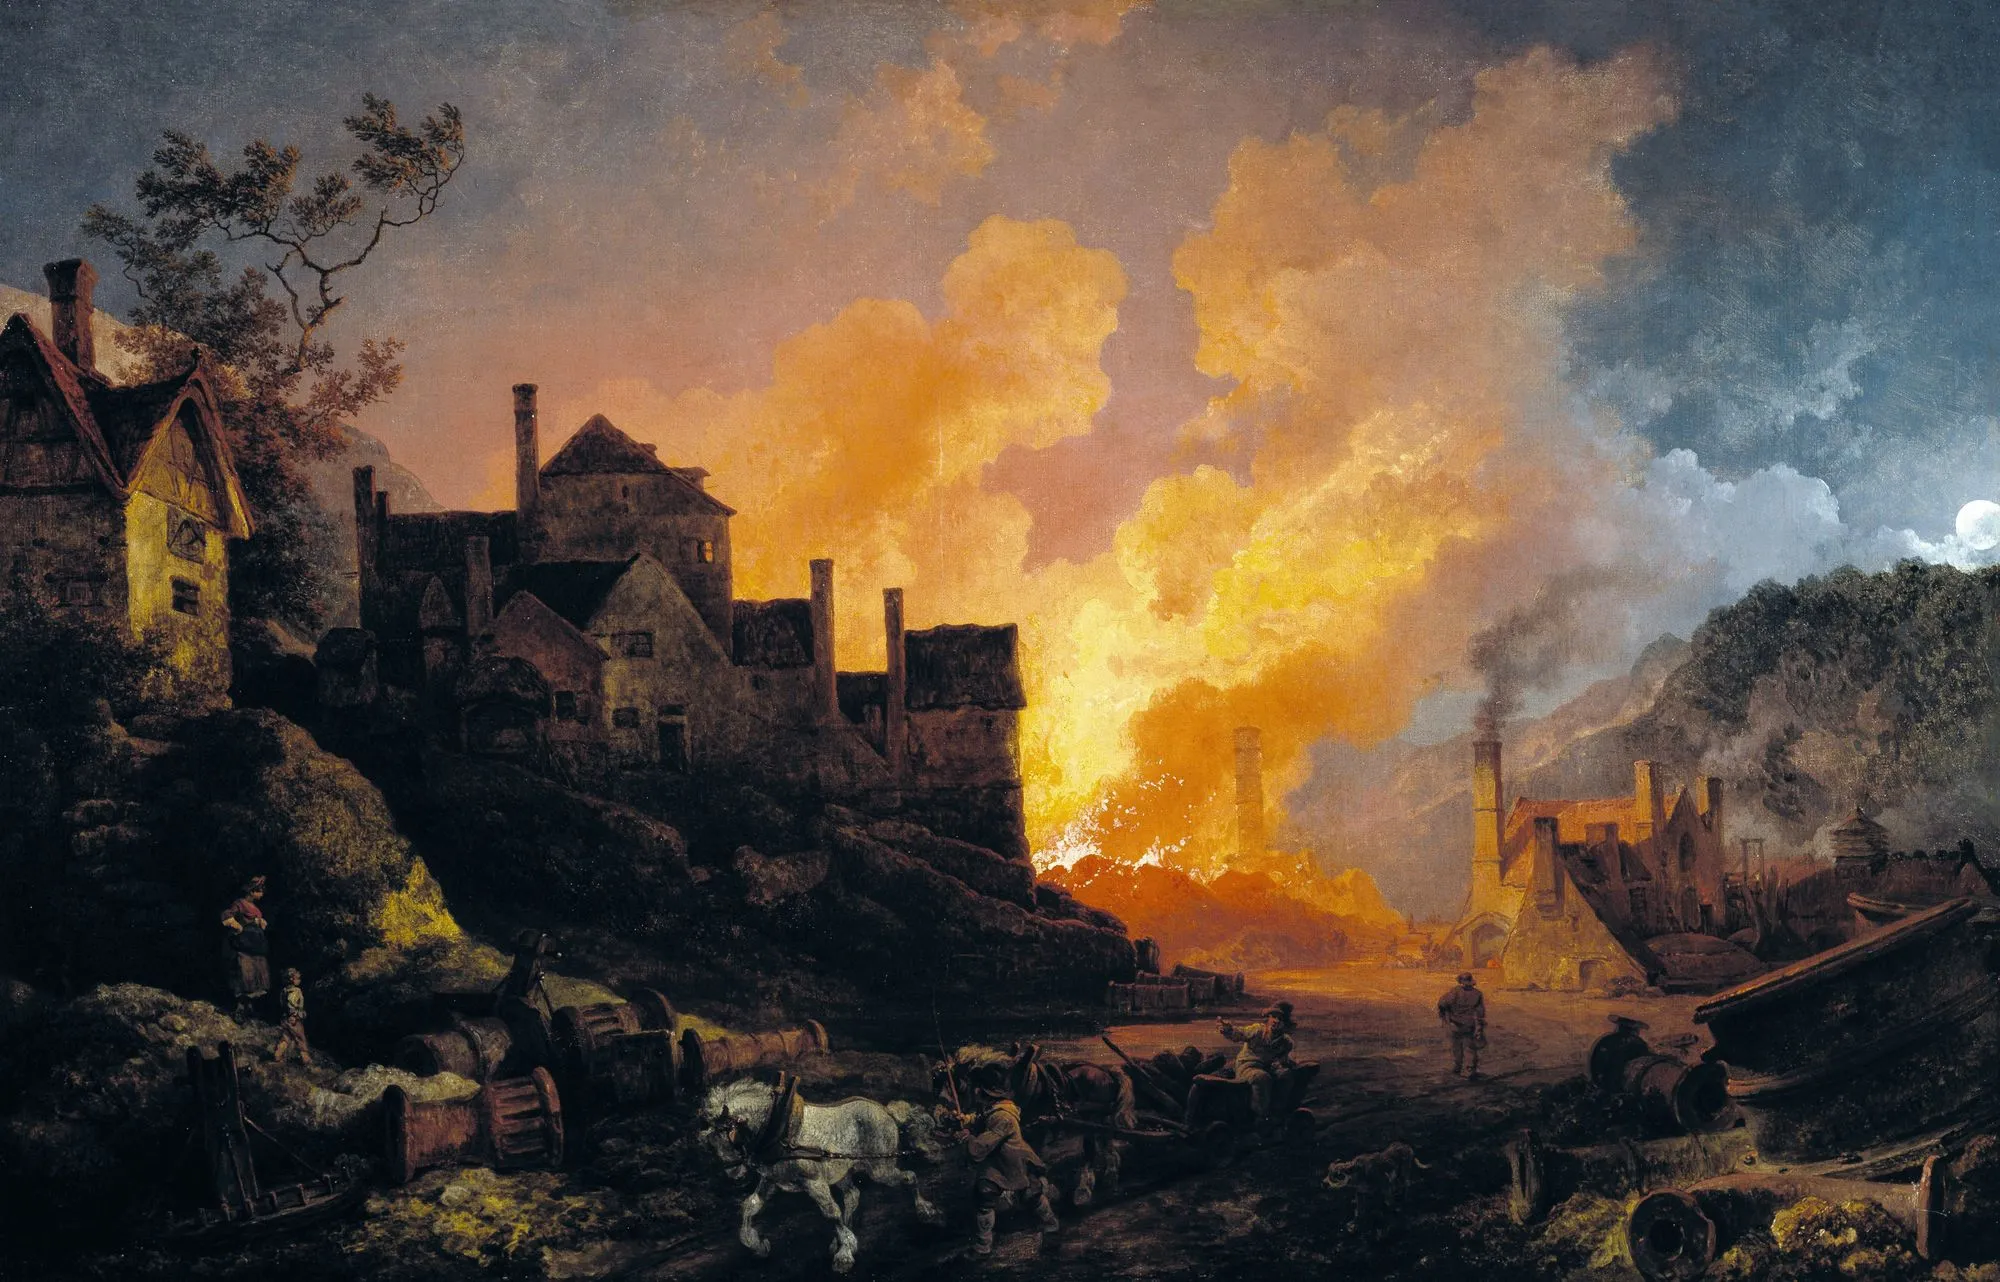 Coalbrookdale by night, Philippe-Jacques de Loutherbourg, 1801.